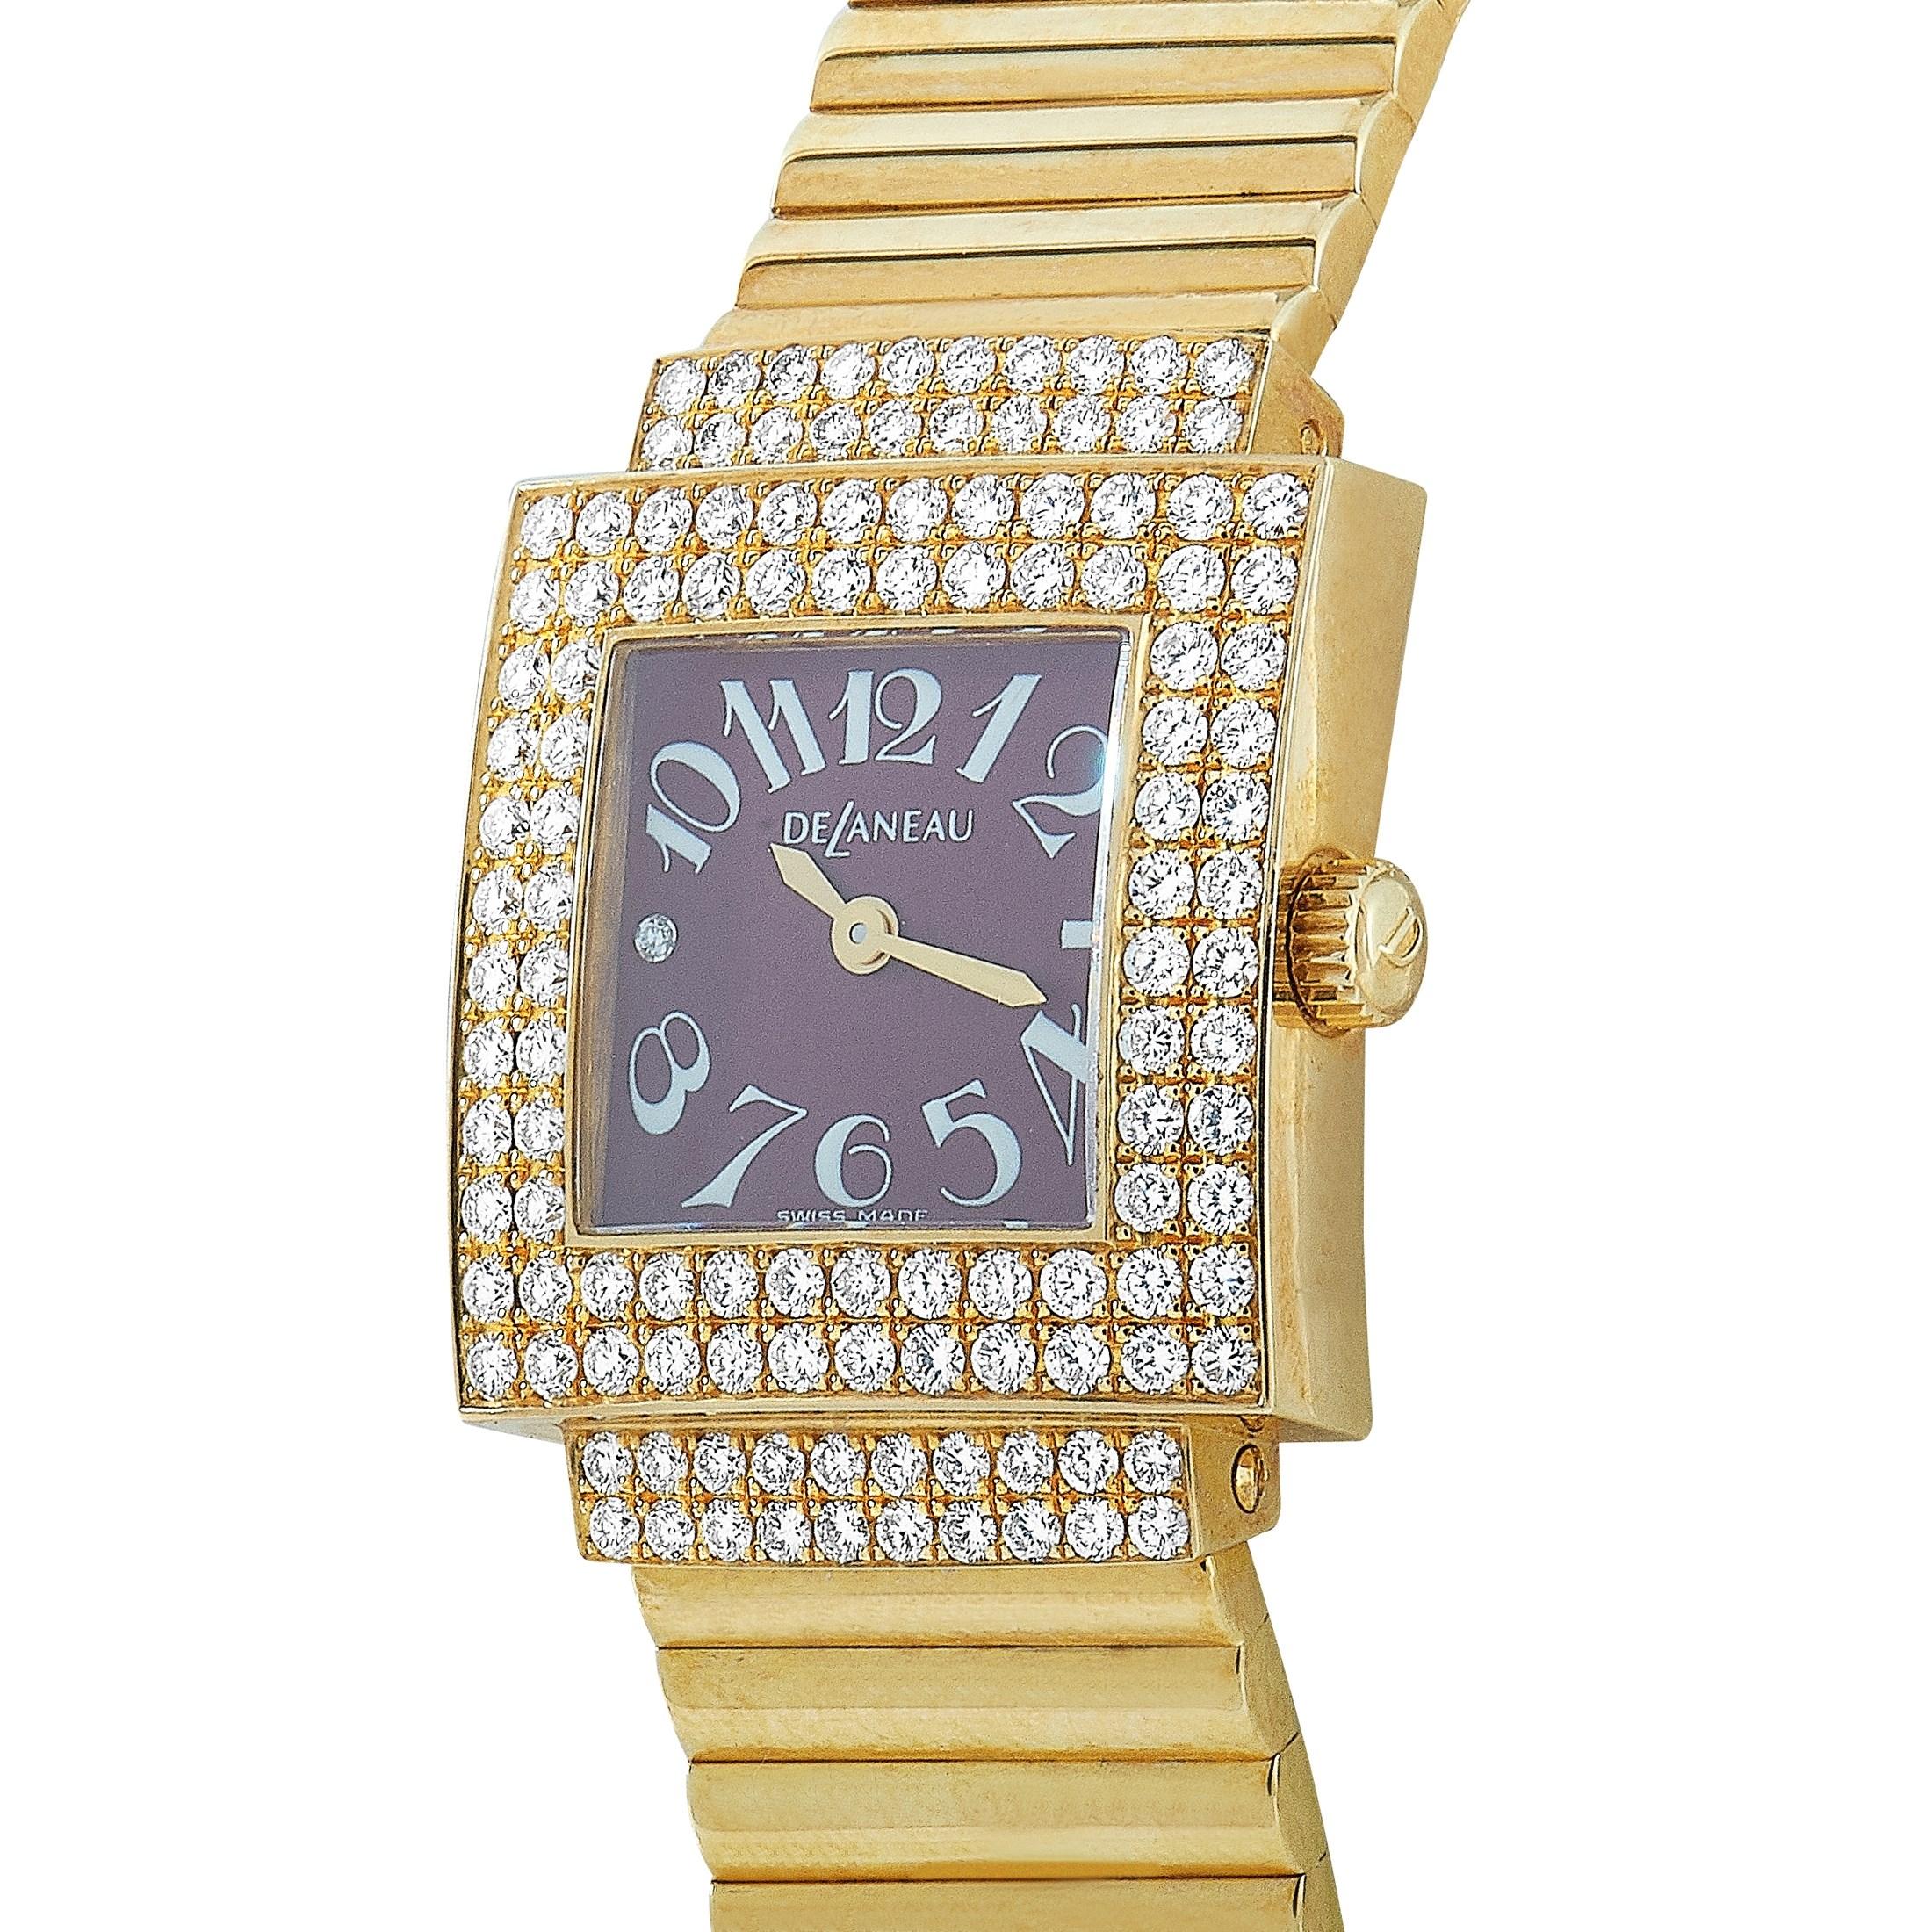 The DeLaneau Bali watch, reference number LBC001 YG EO147, is presented with a diamond-set 18K yellow gold case mounted onto an 18K yellow gold bracelet. The burgundy dial with Arabic numerals is set with a single diamond and features central hours